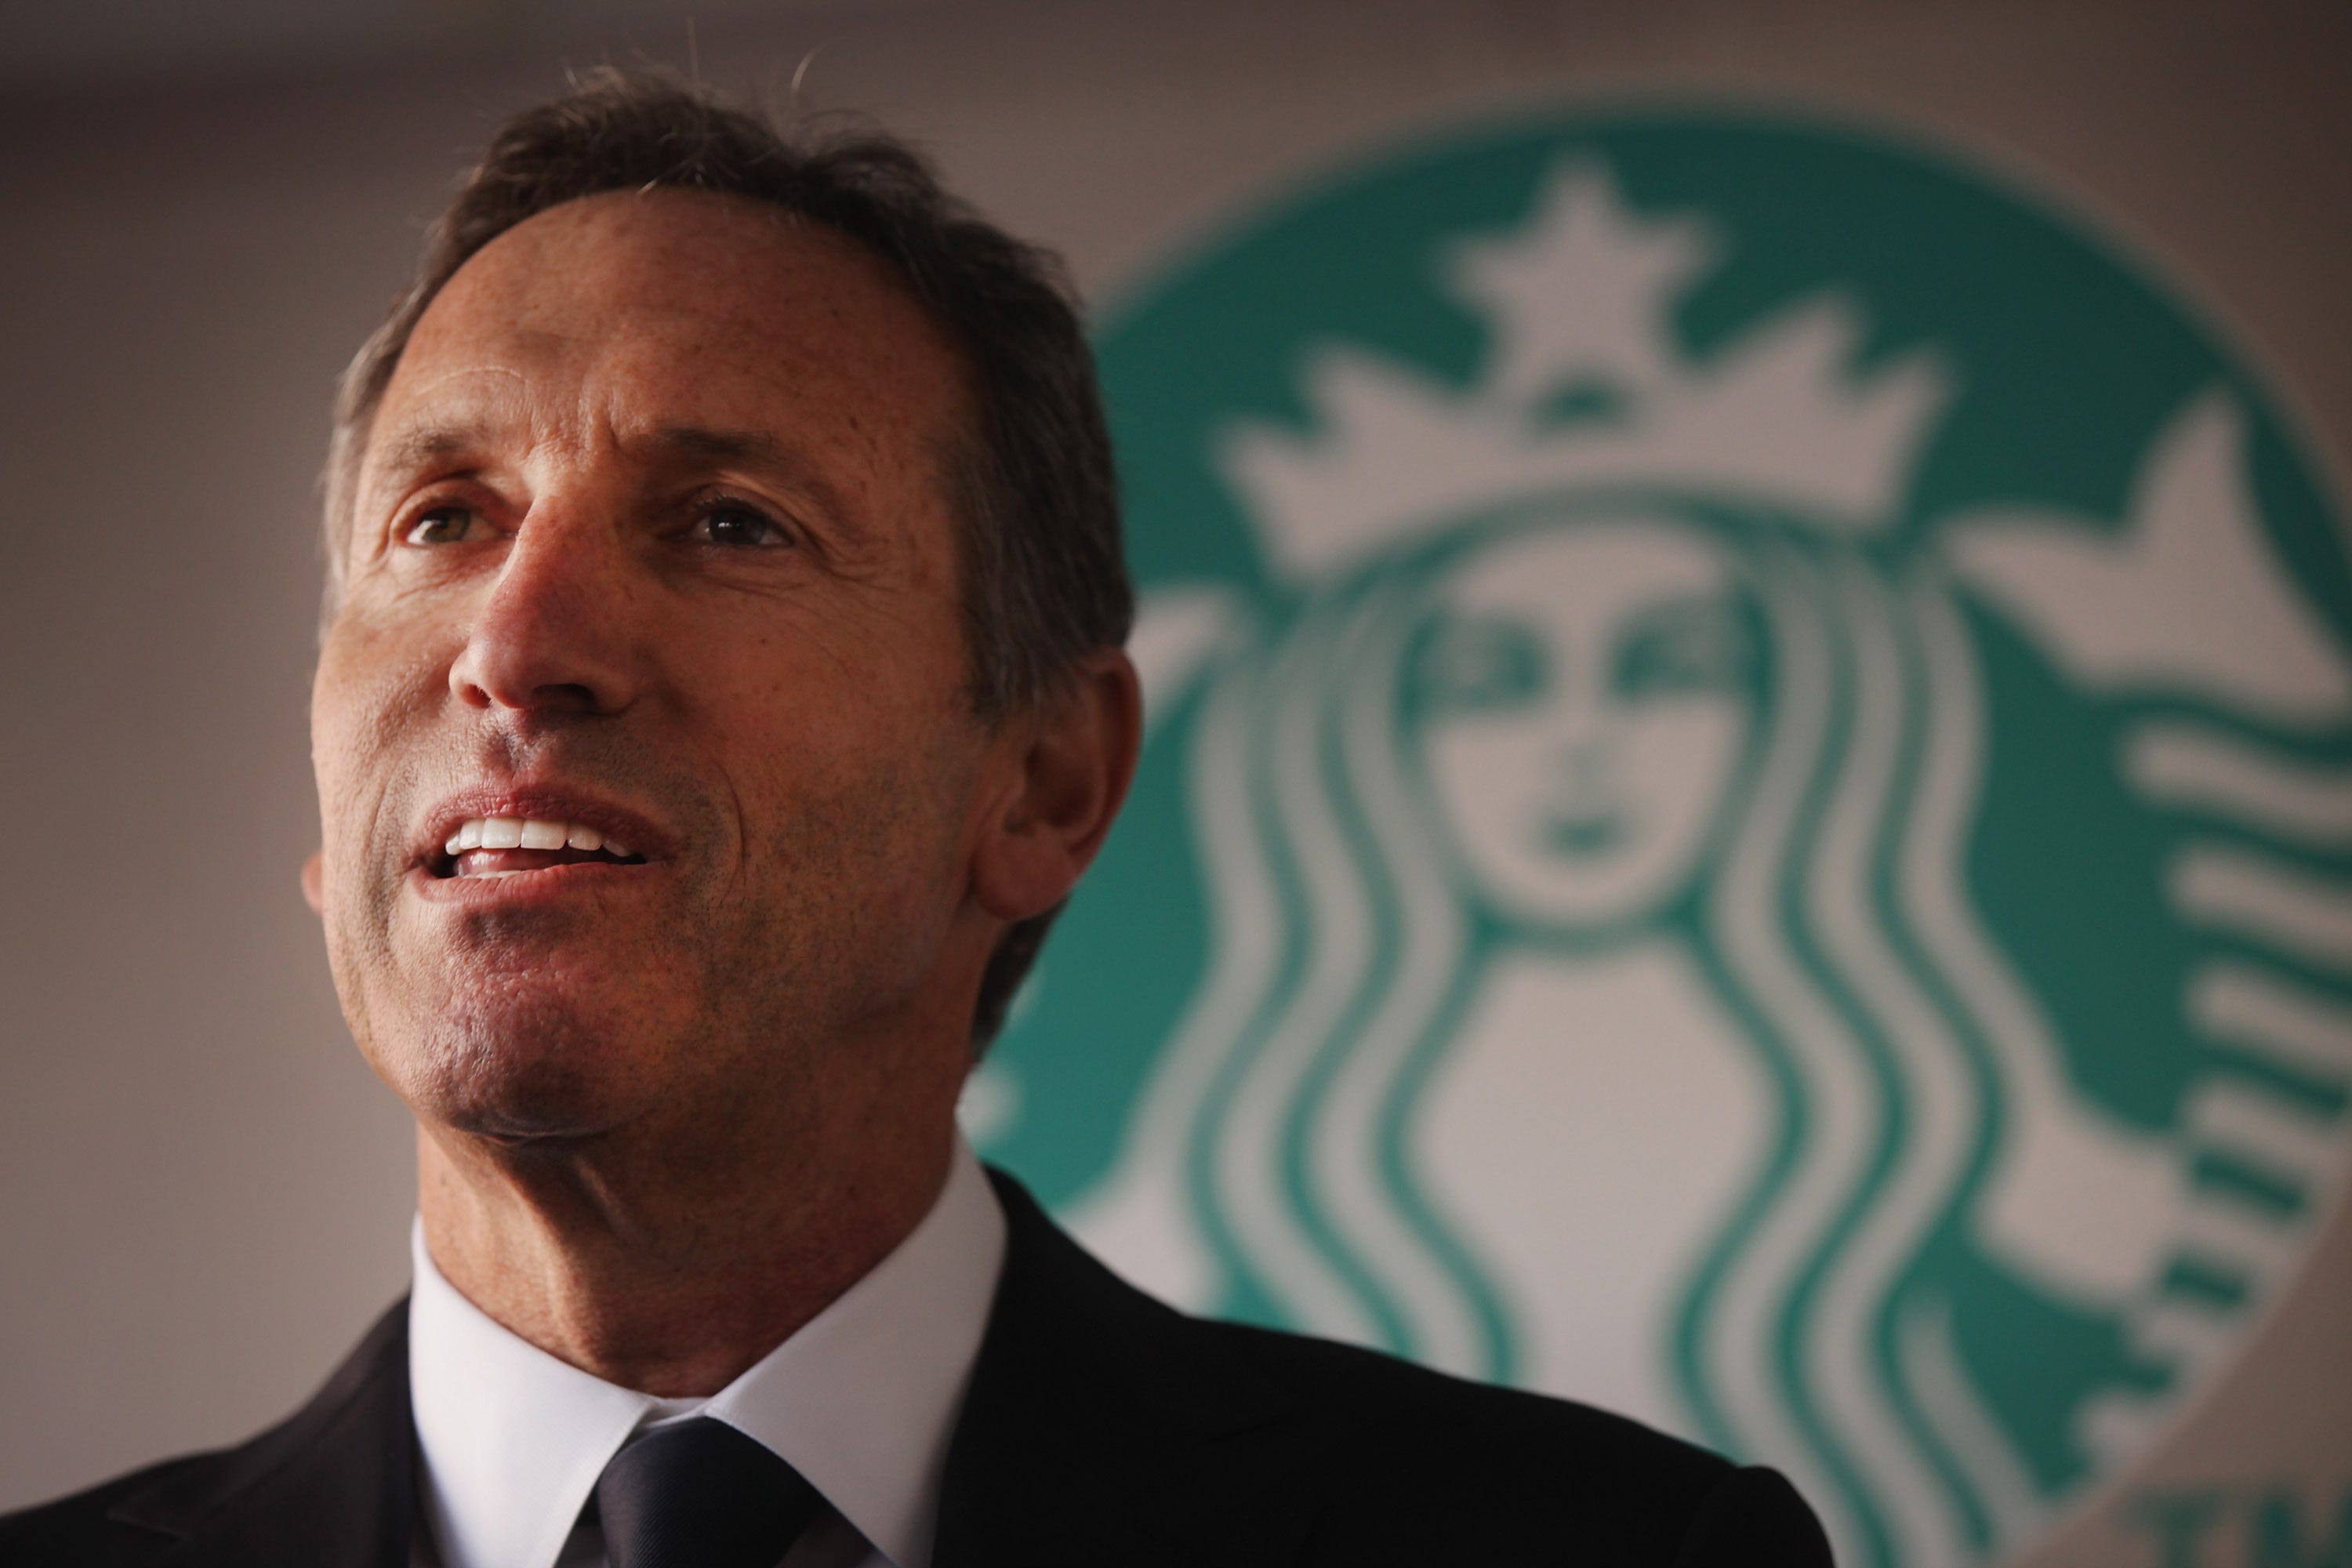 how to, microsoft, howard schultz tells starbucks to fix its stores and mobile app to reverse 'fall from grace'